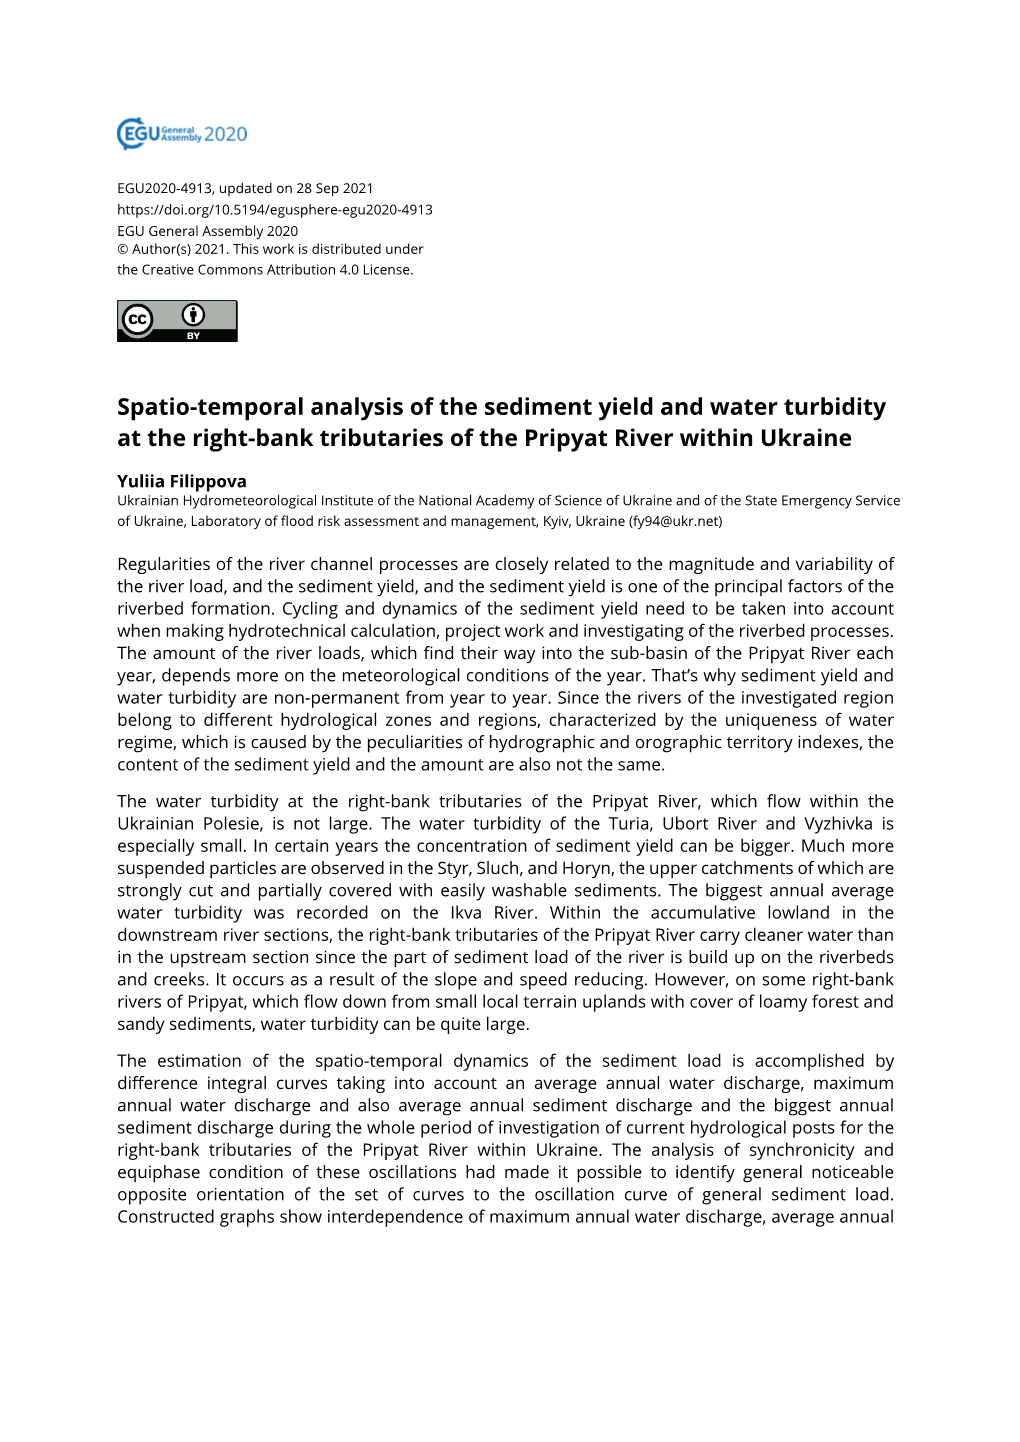 Spatio-Temporal Analysis of the Sediment Yield and Water Turbidity at the Right-Bank Tributaries of the Pripyat River Within Ukraine